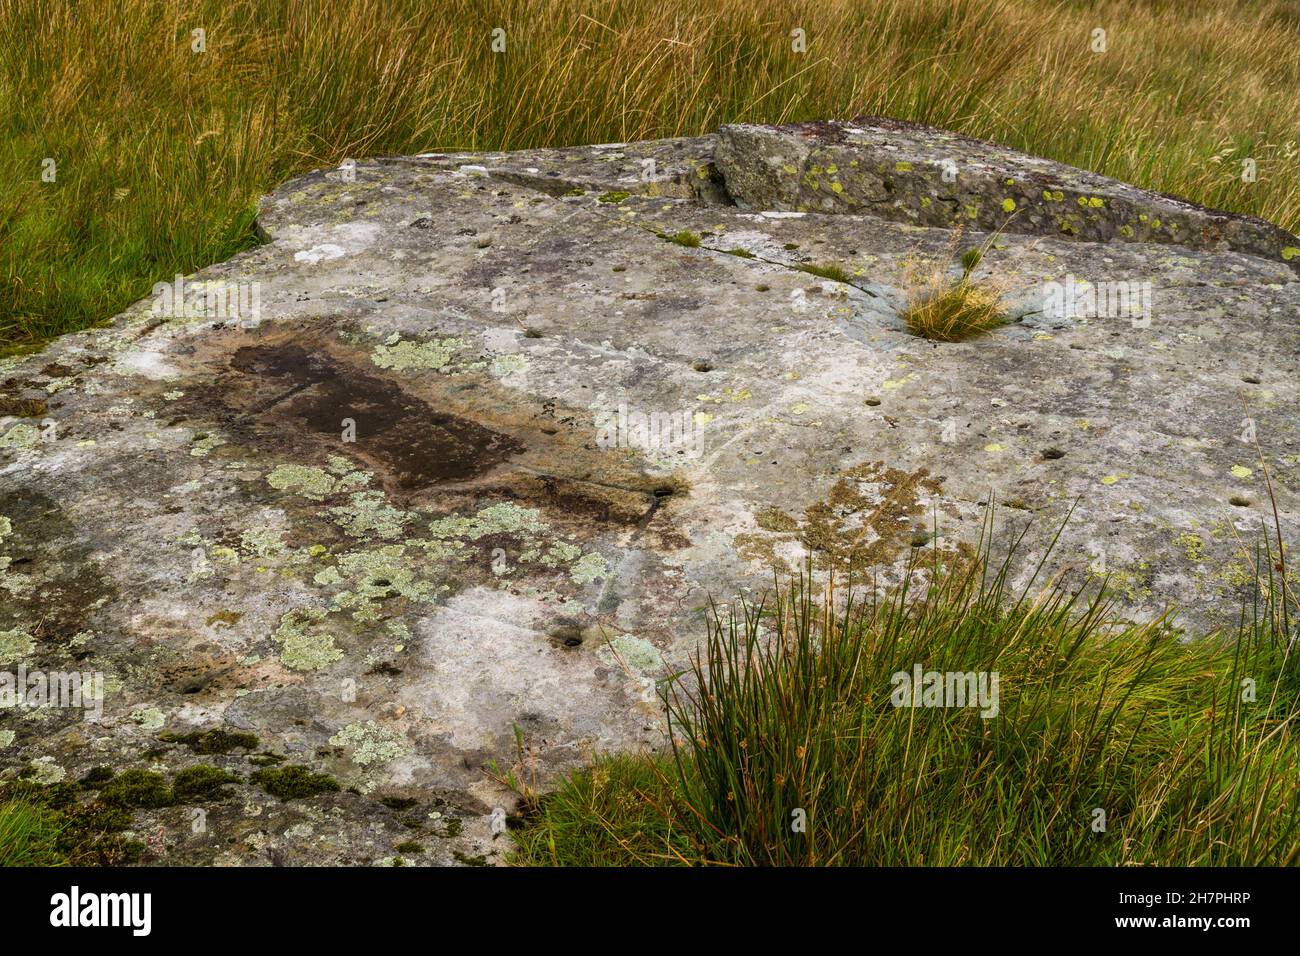 North Wales Rock Cannon, holes in rock or boulder. Gun powder used to make bangs in celebrations landscape. Stock Photo